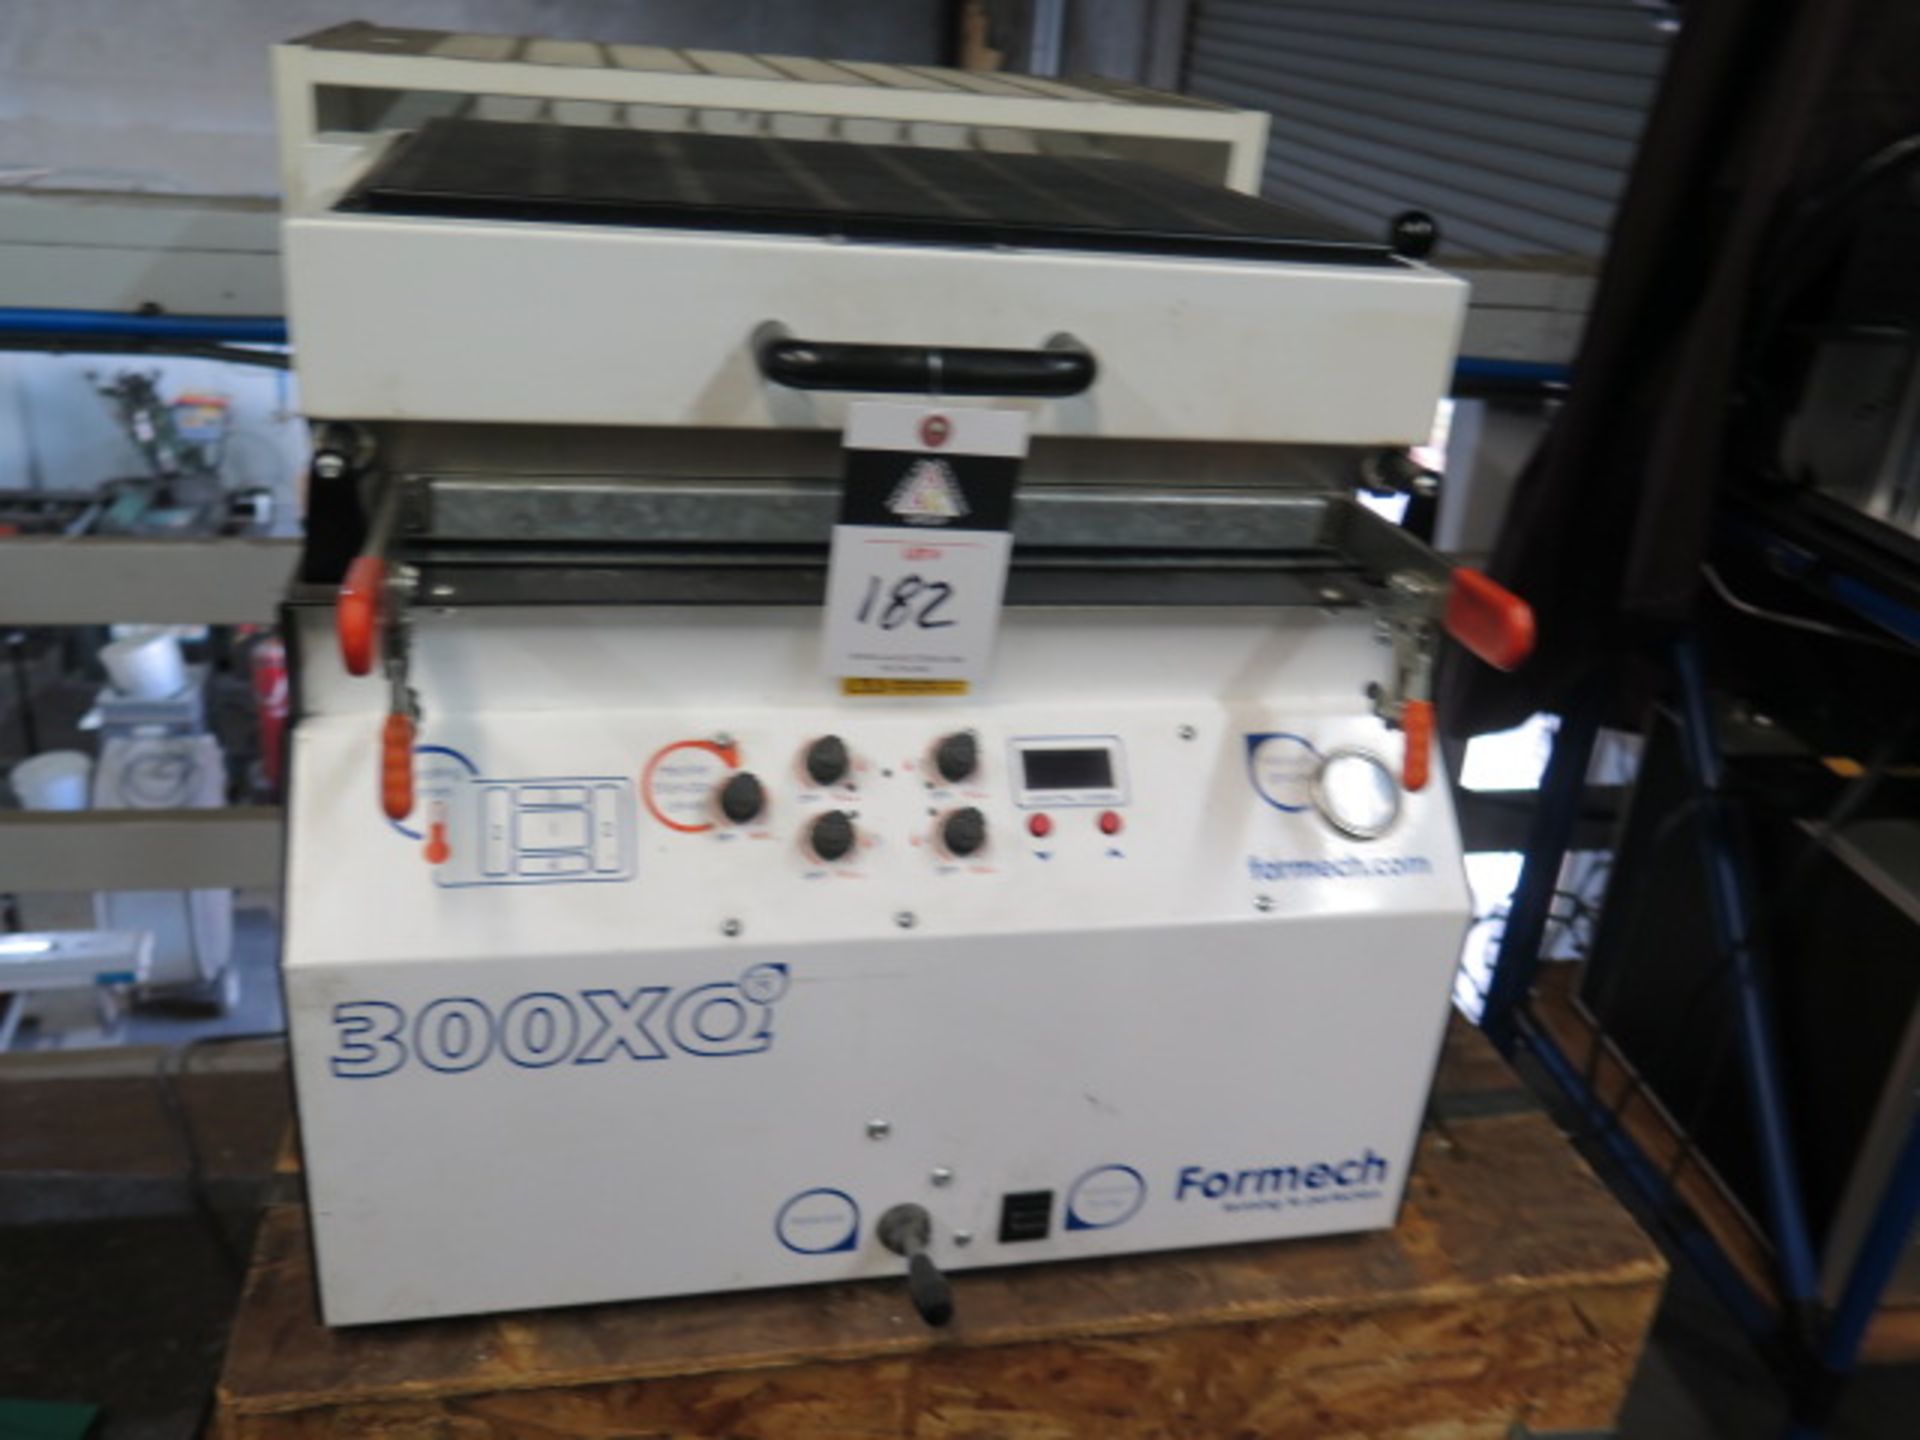 2011 Farmech 300XQ Thermo Vacuum Former s/n 33730 (SOLD AS-IS - NO WARRANTY) - Image 3 of 9